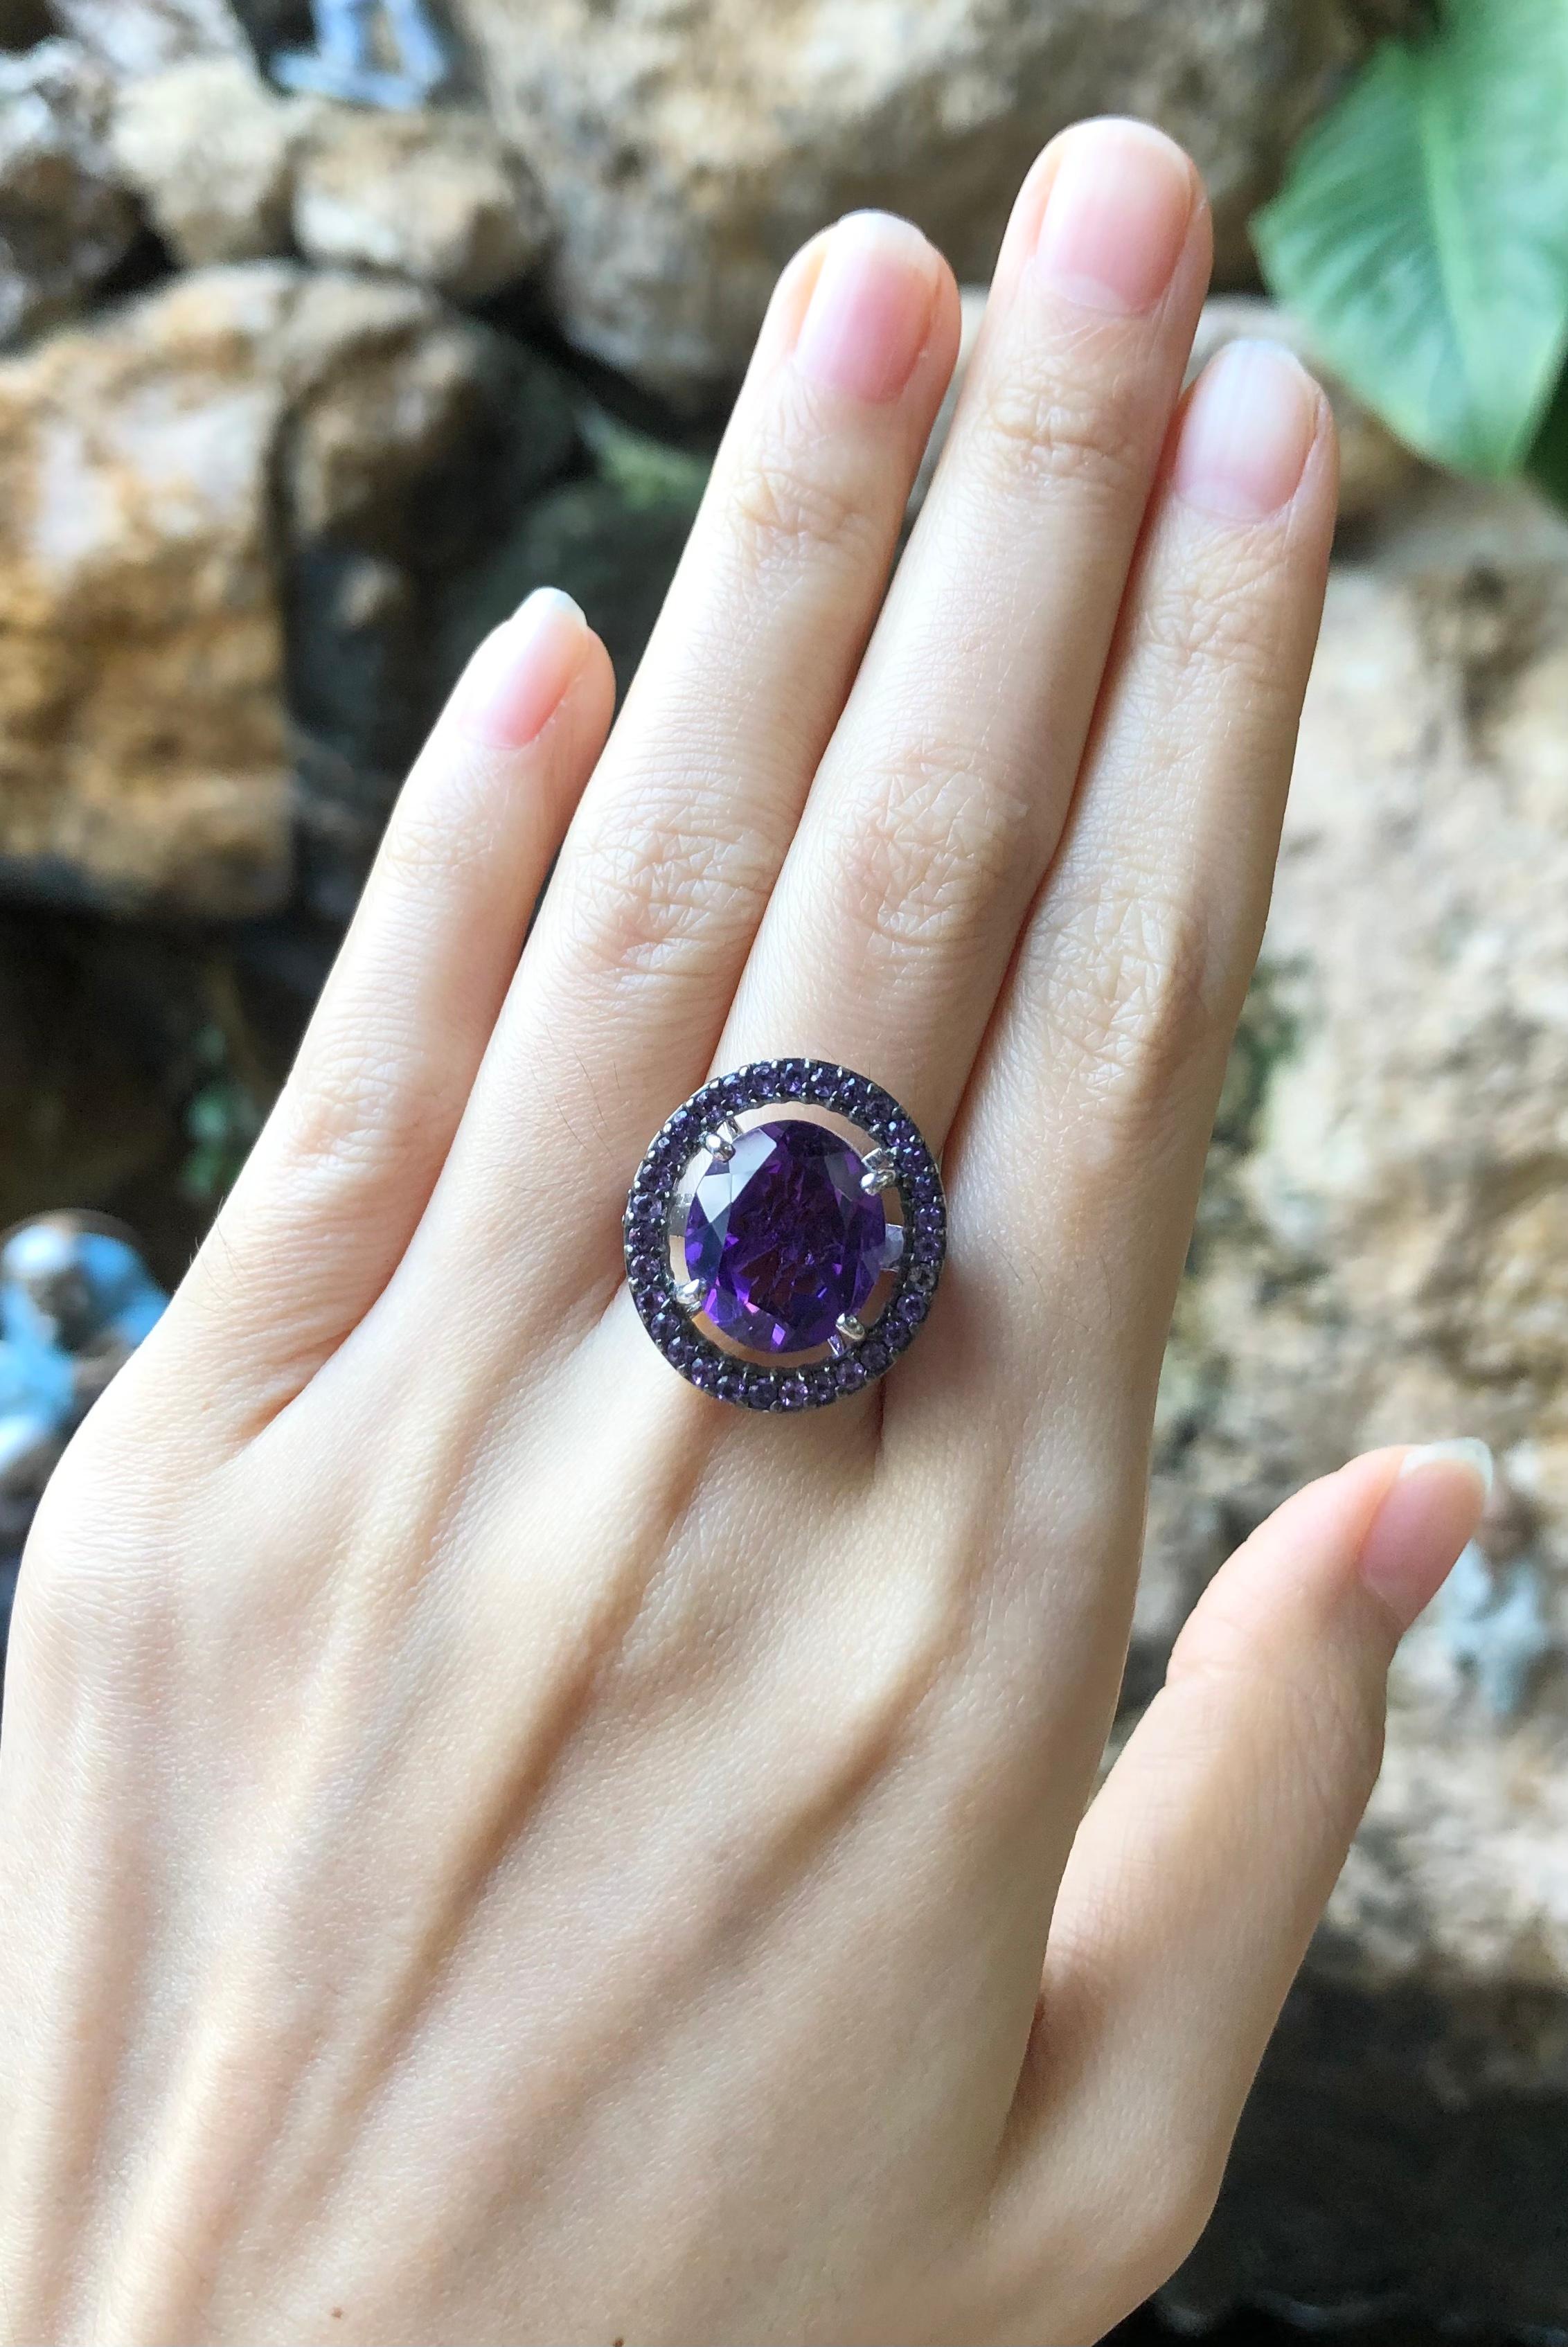 Amethyst 6.60 carats with Amethyst 0.99 carat Ring set in 18 Karat White Gold Settings

Width:  1.9 cm 
Length: 2.1 cm
Ring Size: 54
Total Weight: 9.72 grams

Amethyst
Width:  1.0 cm 
Length: 1.3 cm

